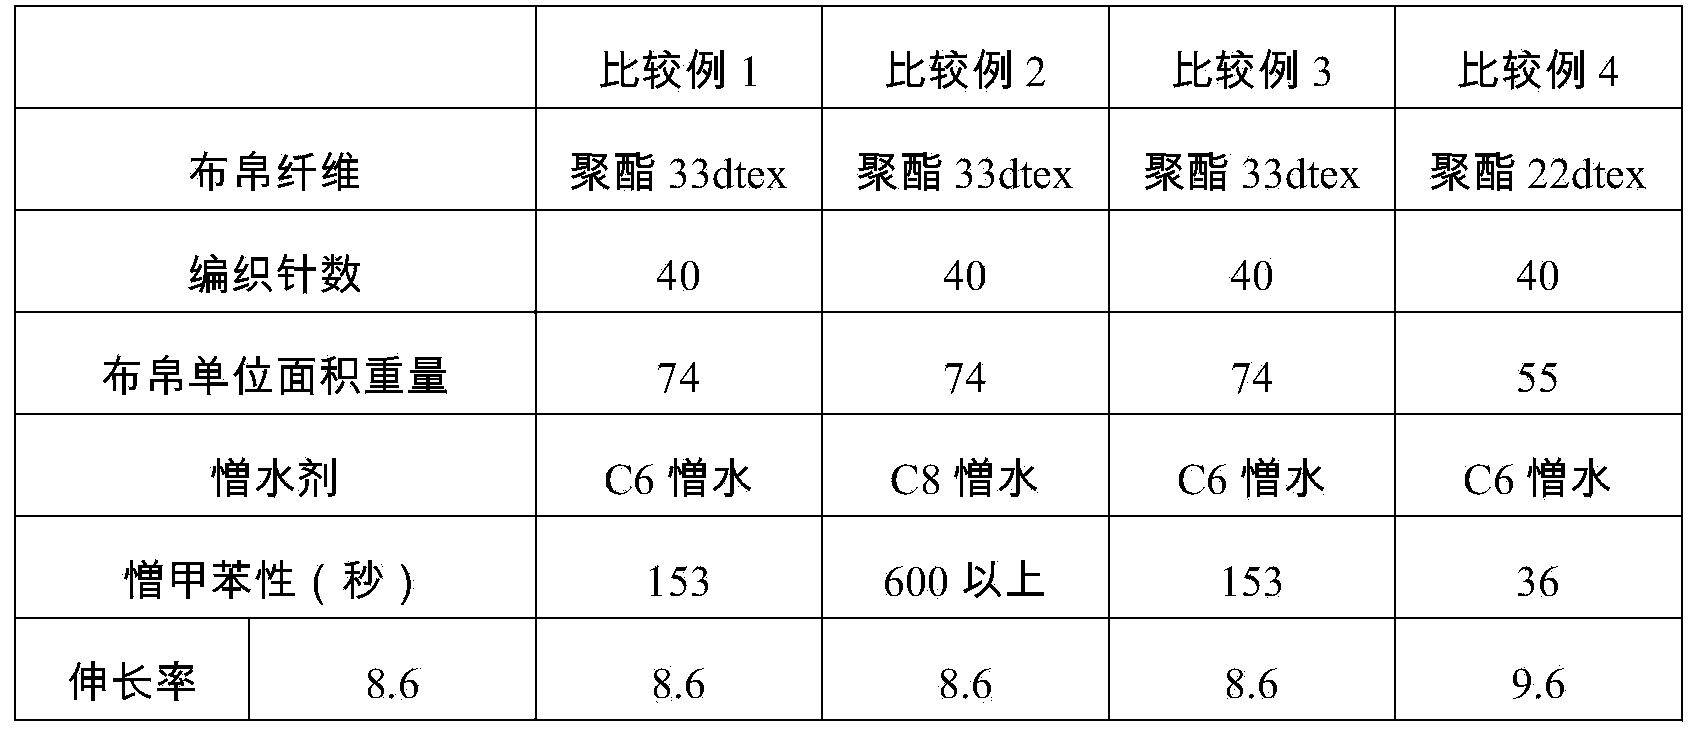 Stretchable coated fabric and process for producing same